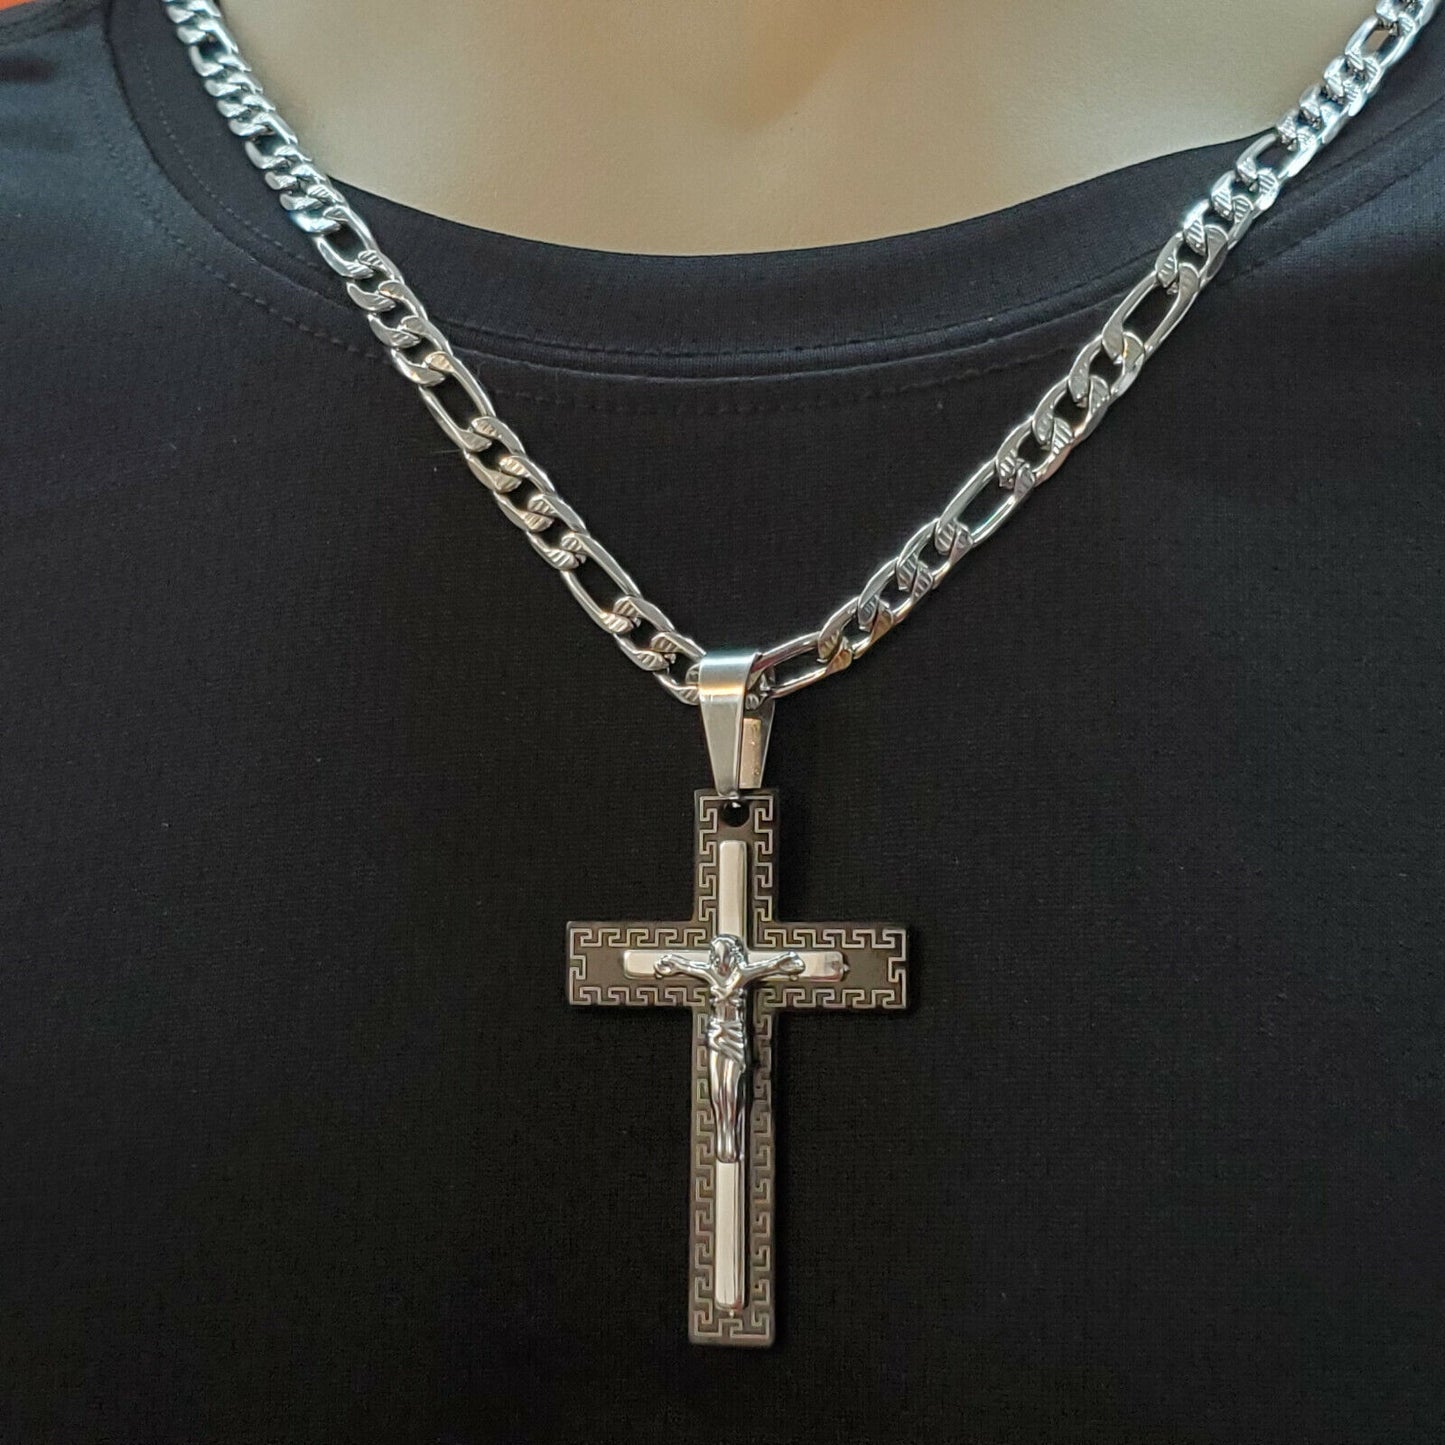 Necklaces - Stainless Steel. Silver-Black Crucifix Jesus Cross Pendant & Chain.